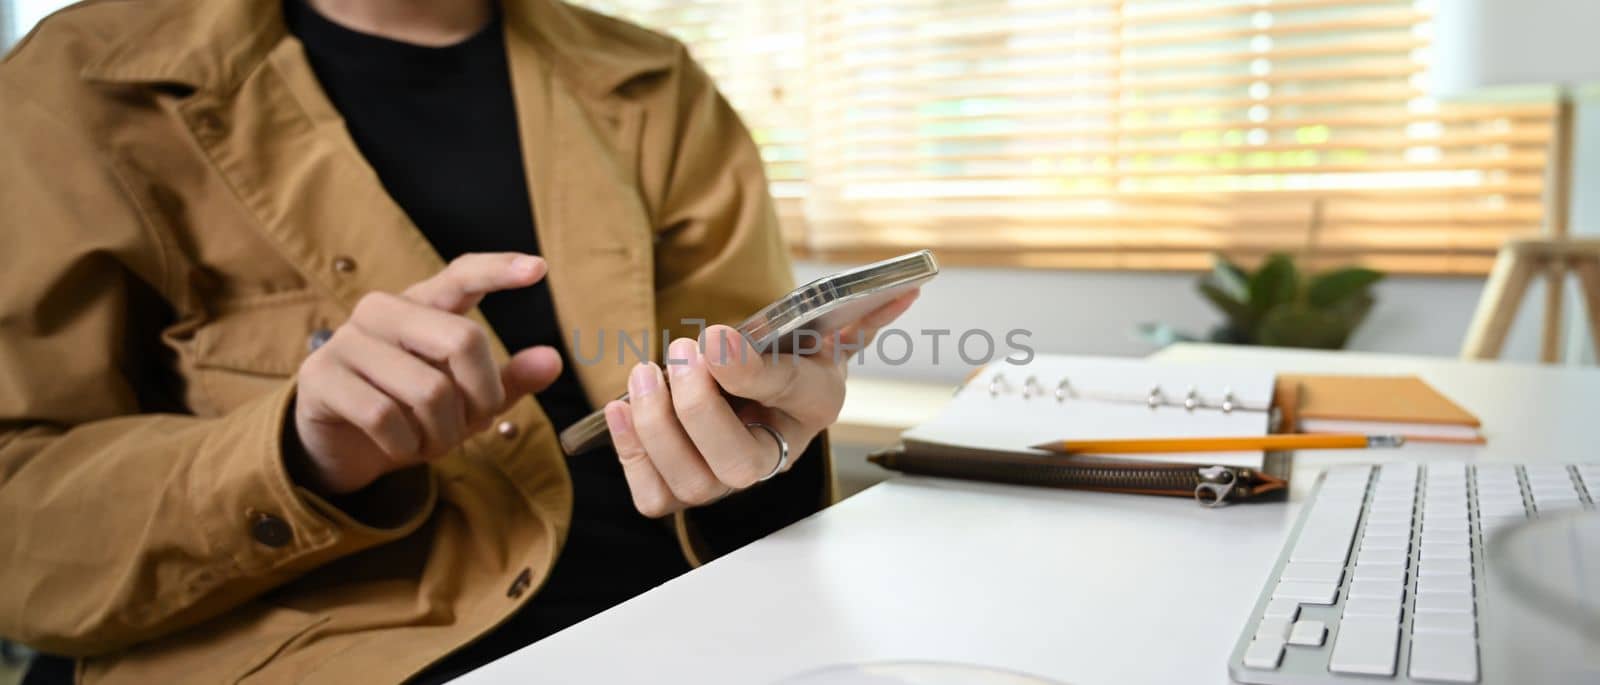 Man freelancer using smart phone while sitting in living room.